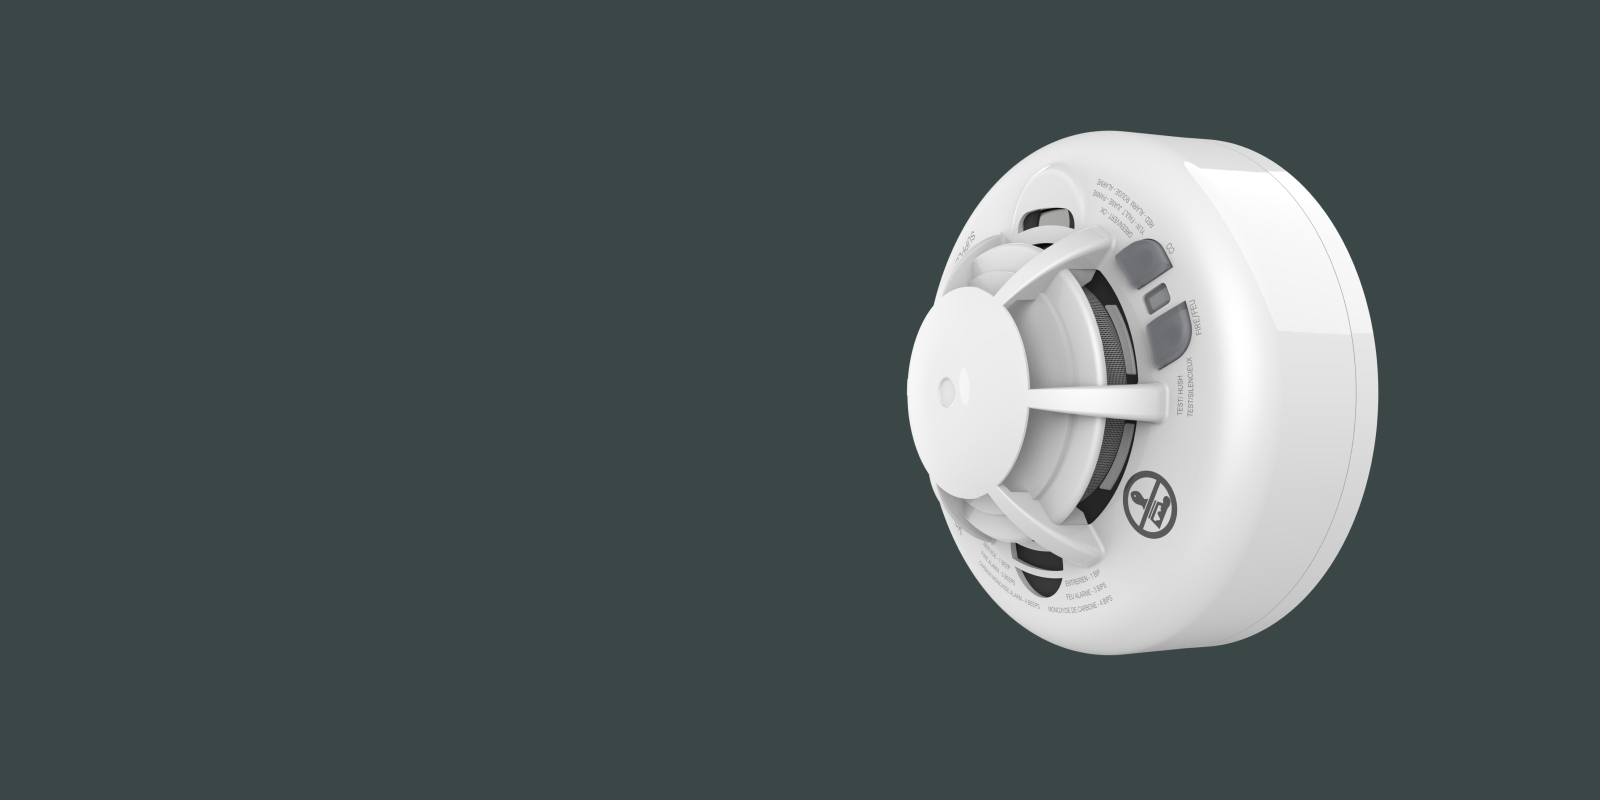 Product image of the combination smoke and carbon monoxide detector